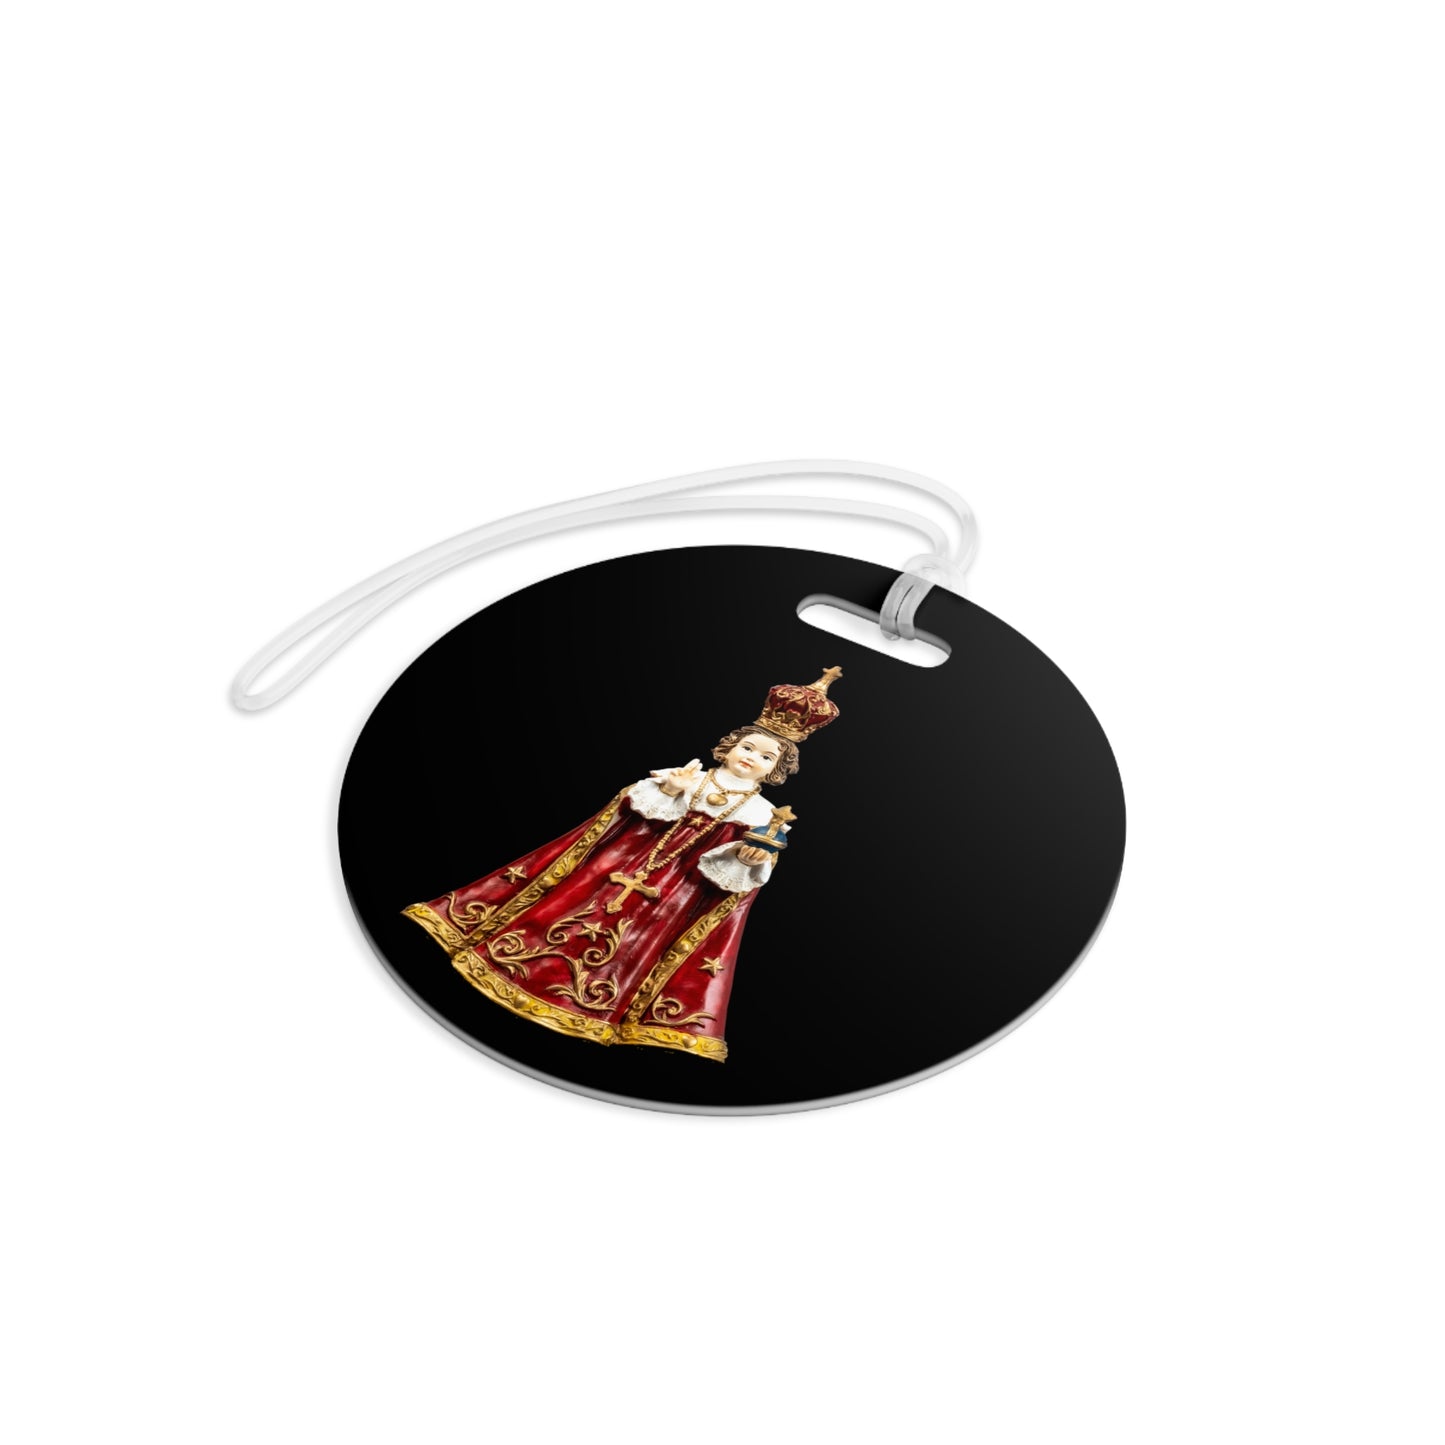 Infant of Prague Luggage Tags